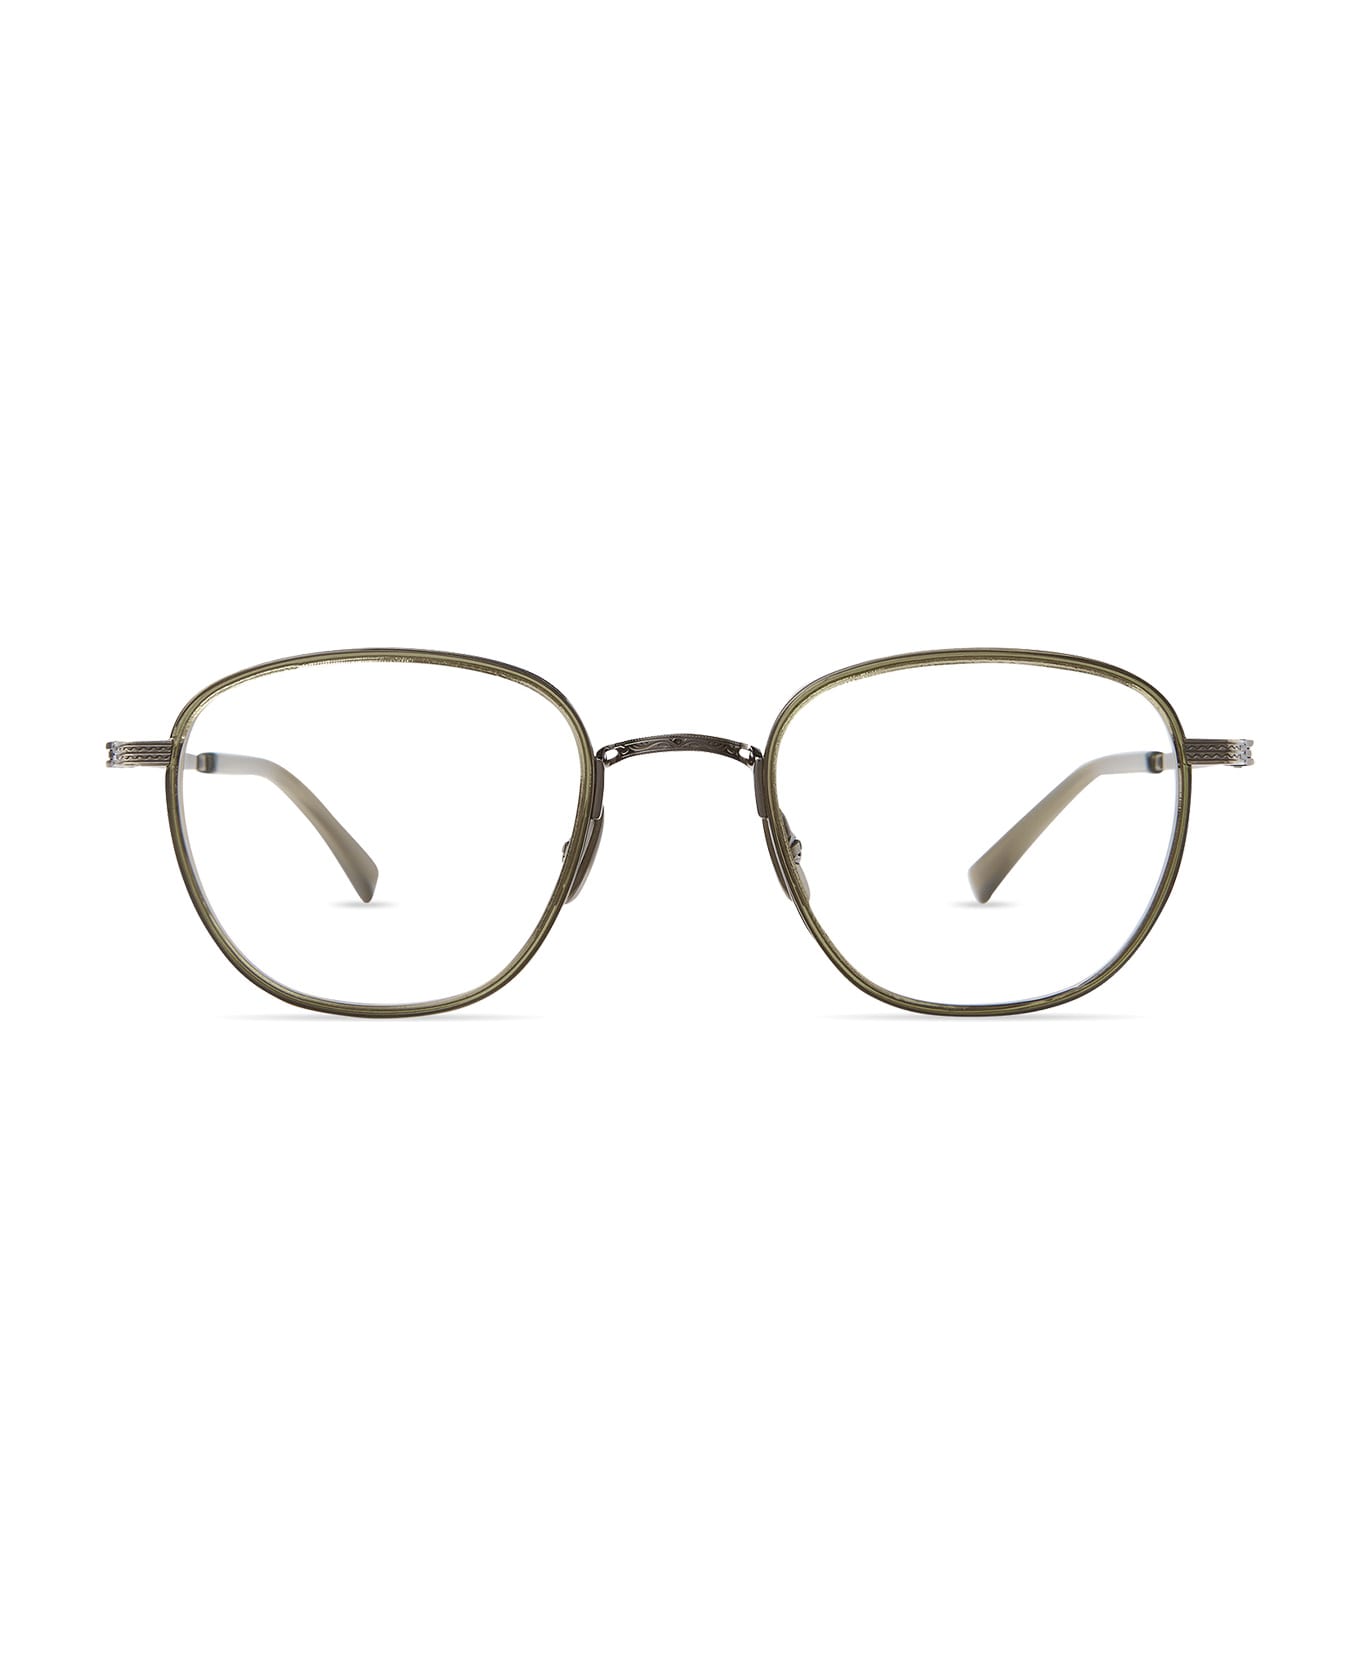 Mr. Leight Griffith Ii C Limu-pewter Glasses - Limu-Pewter アイウェア